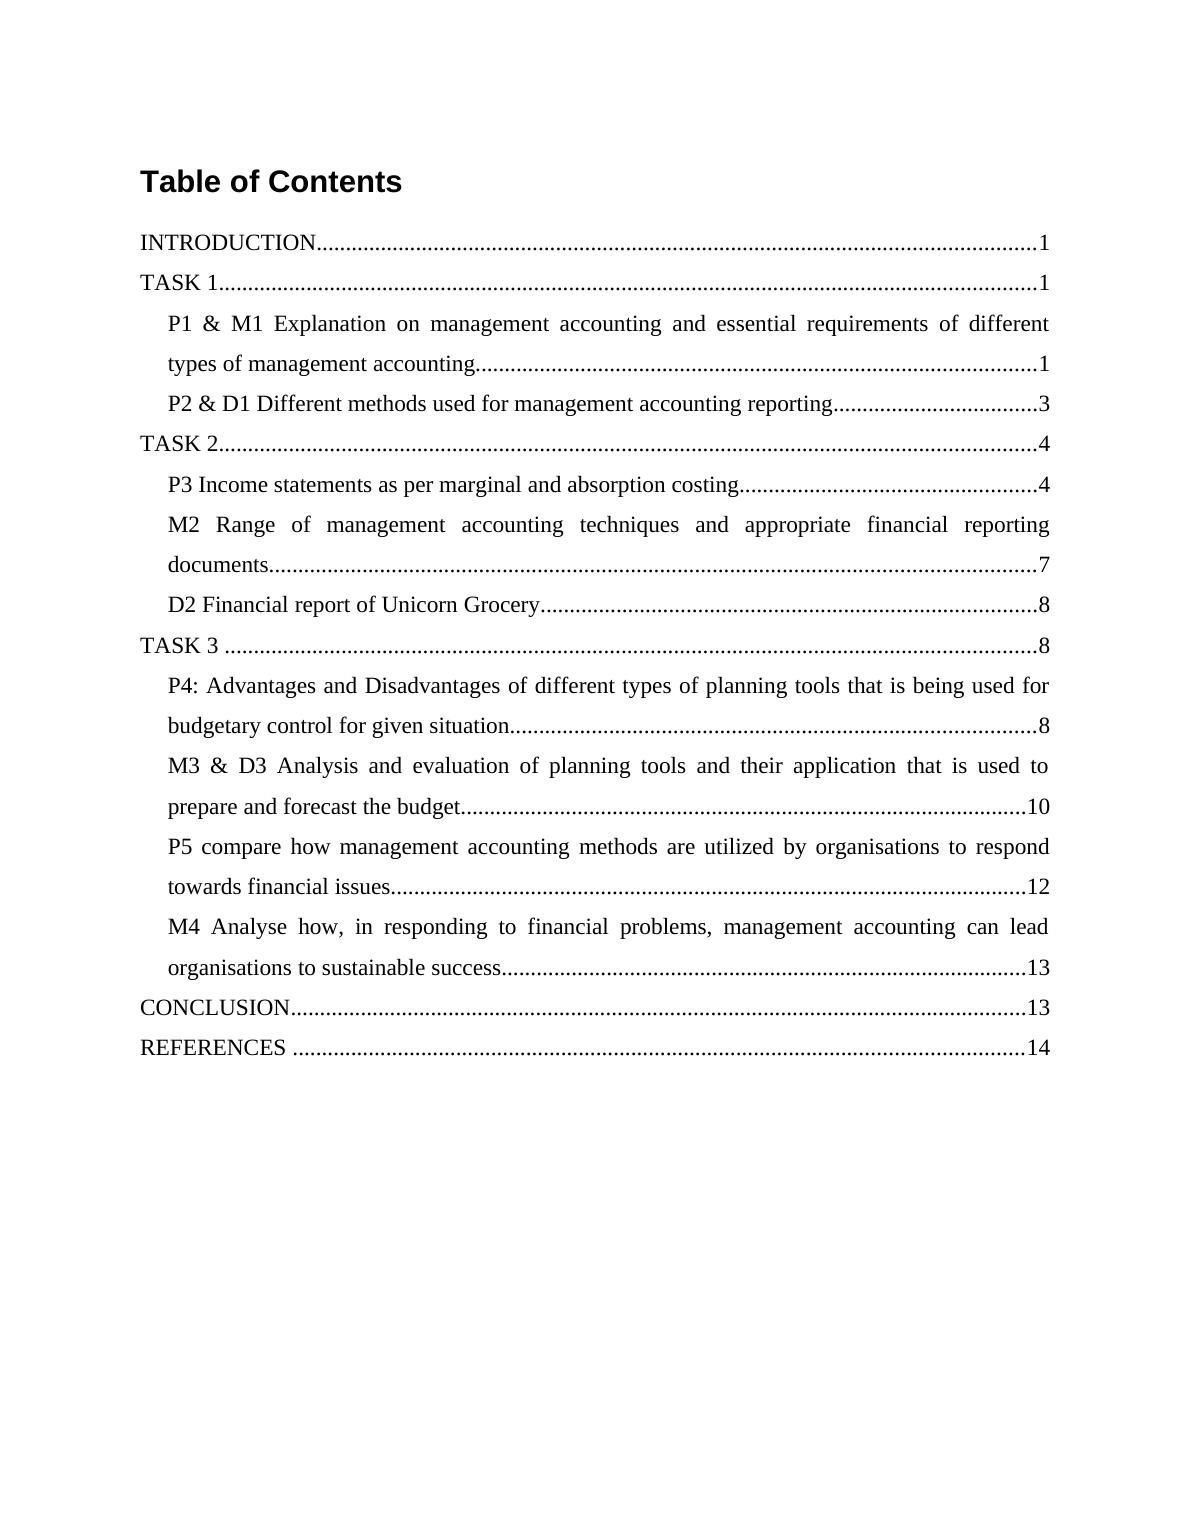 Management Accounting Techniques : Assignment_2